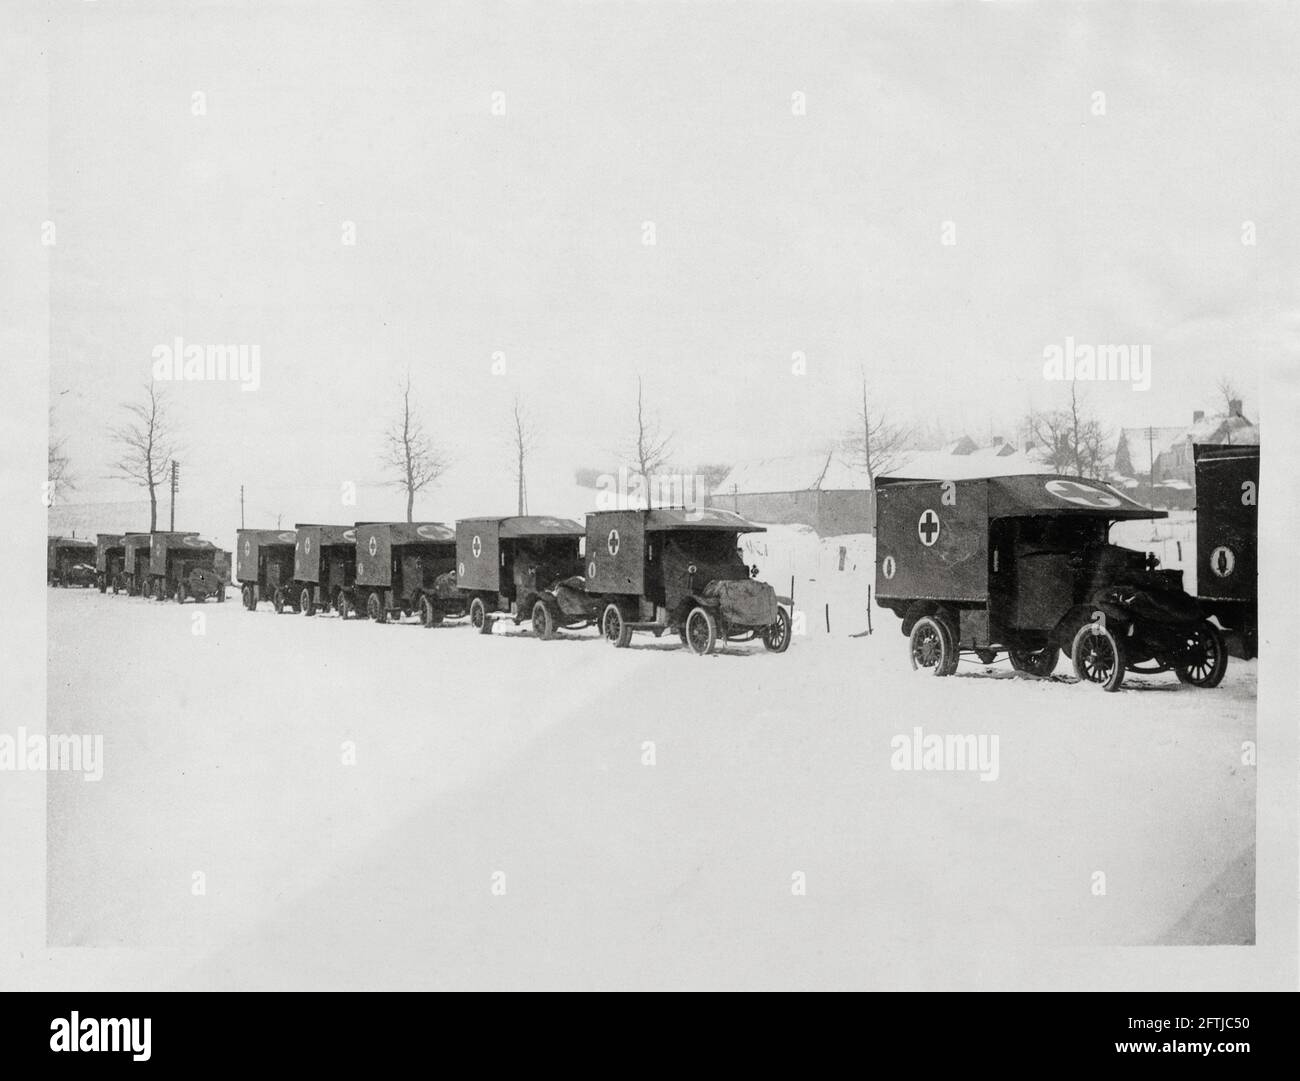 World War One, WWI, Western Front - Ambulance cars await orders in the snow, France Stock Photo